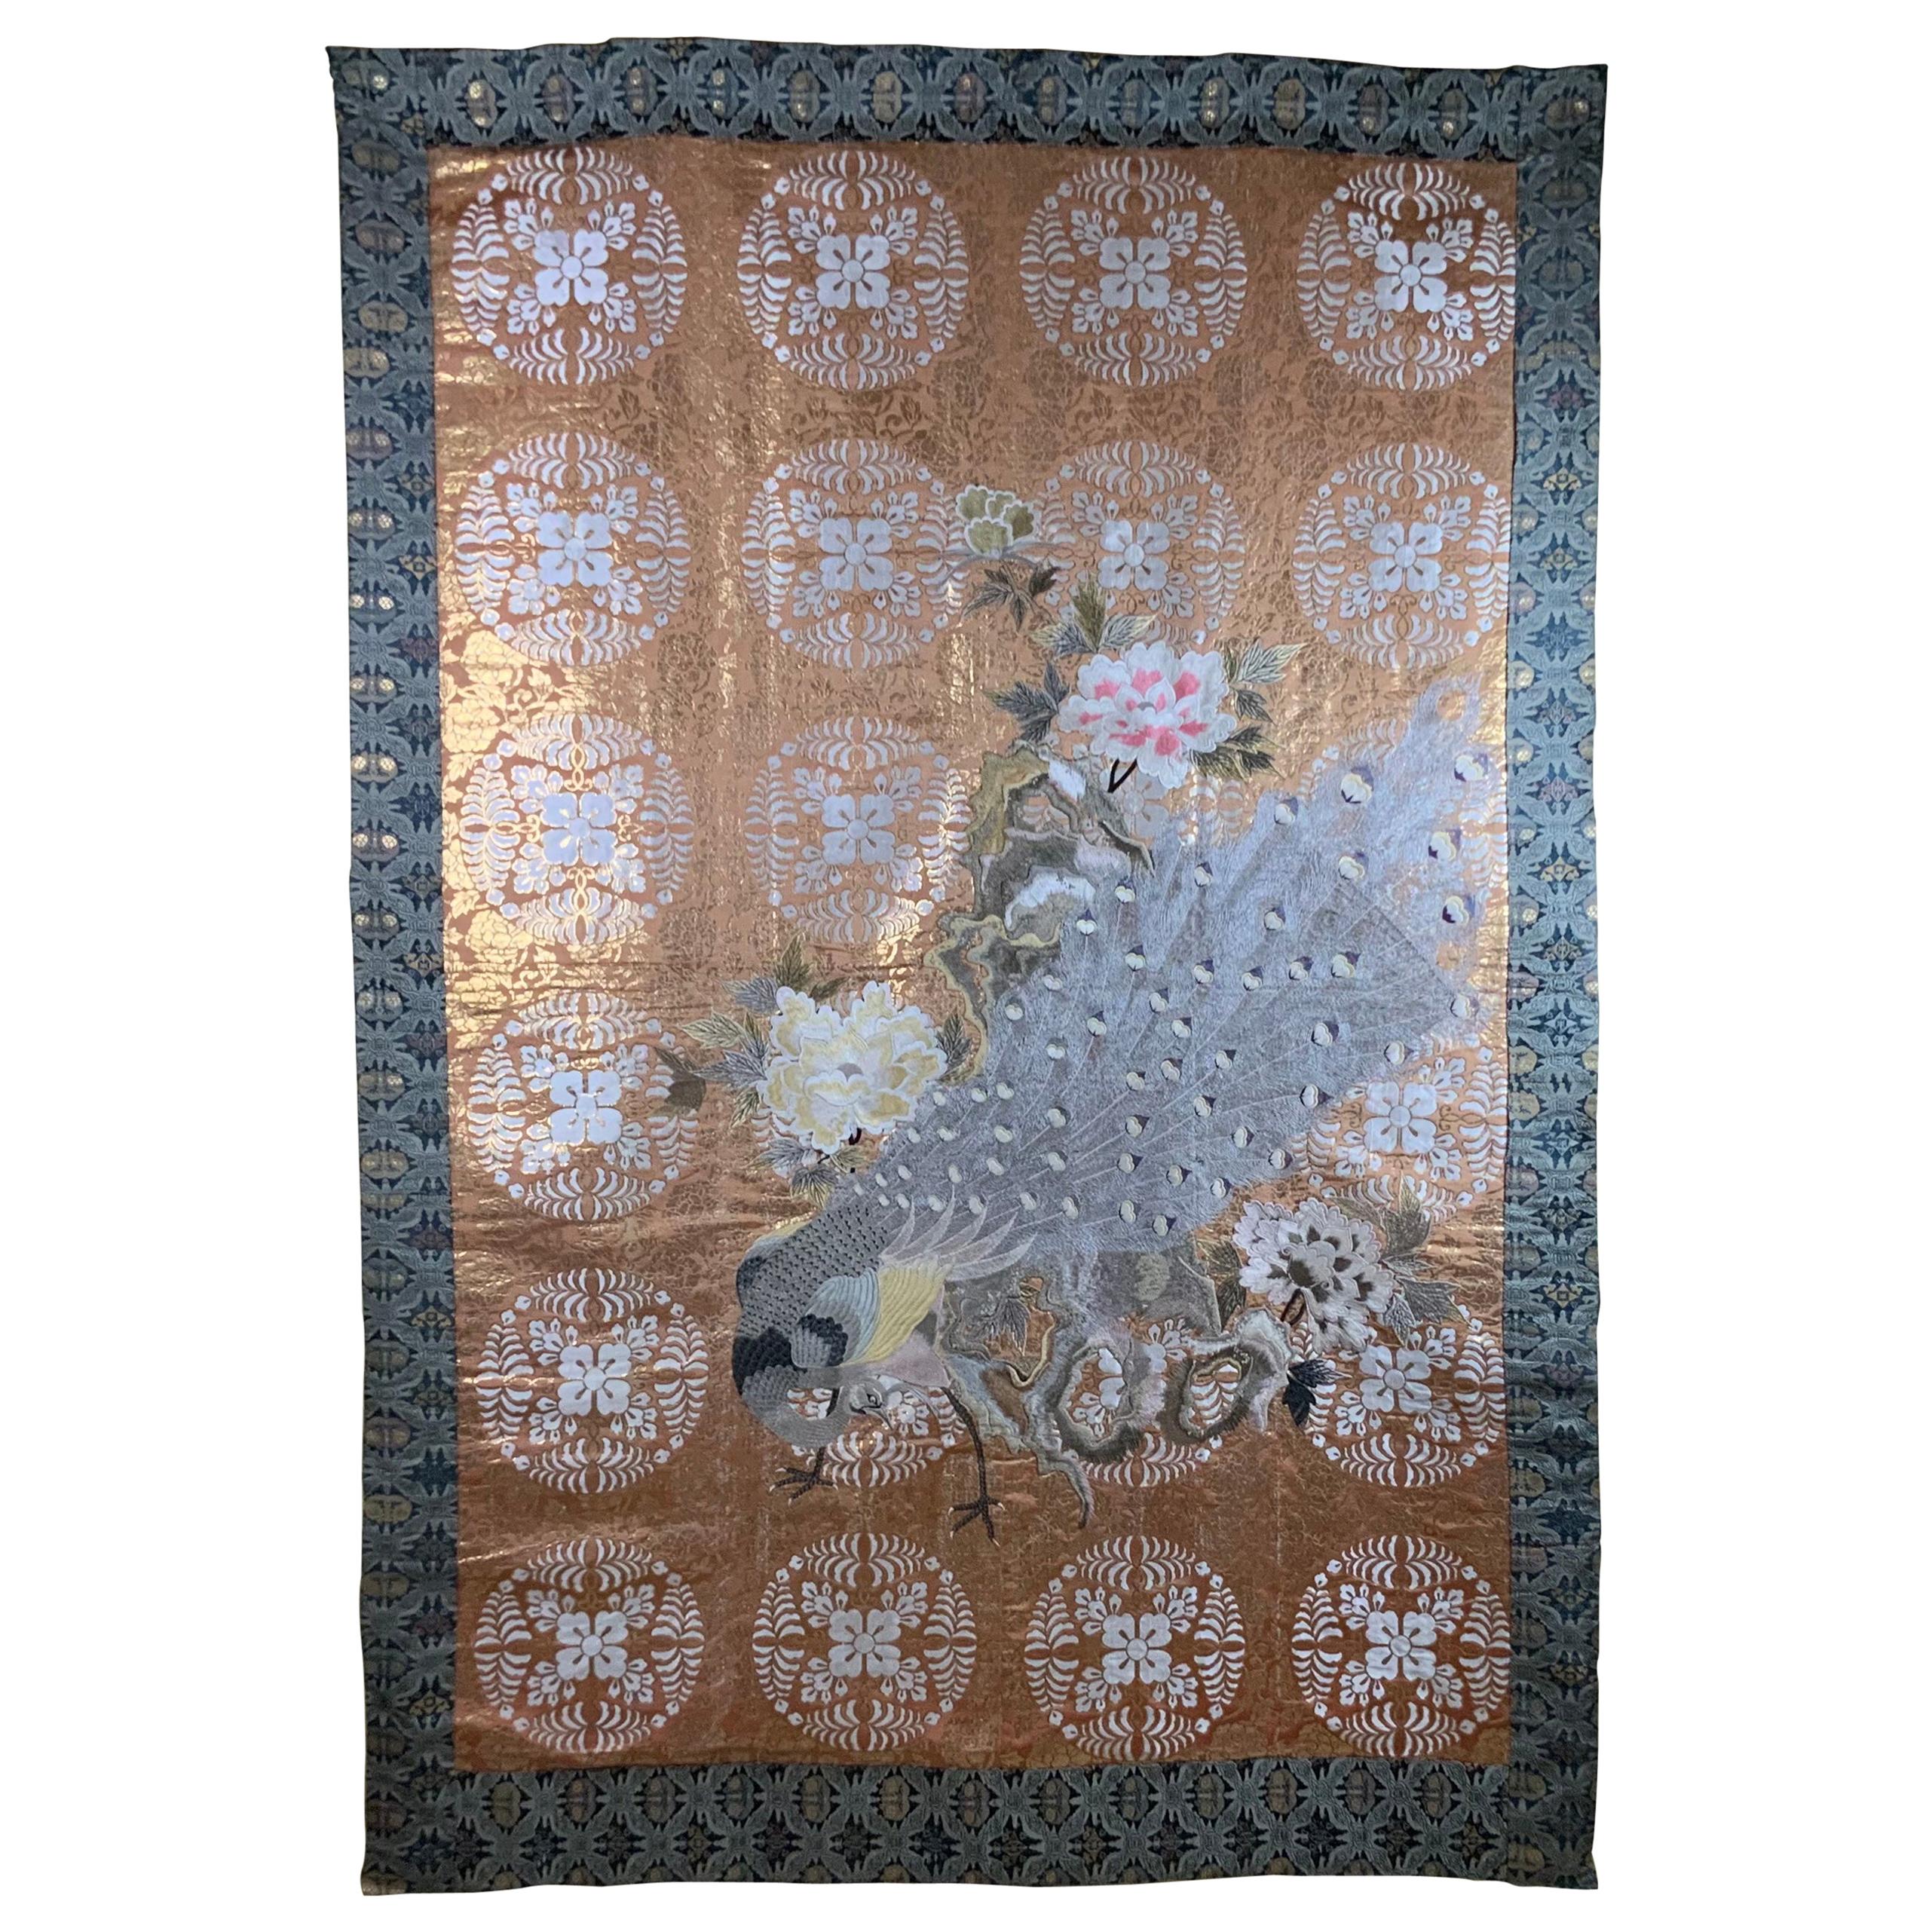 Large Vintage Chinese Hand Embroidery Tapestry For Sale